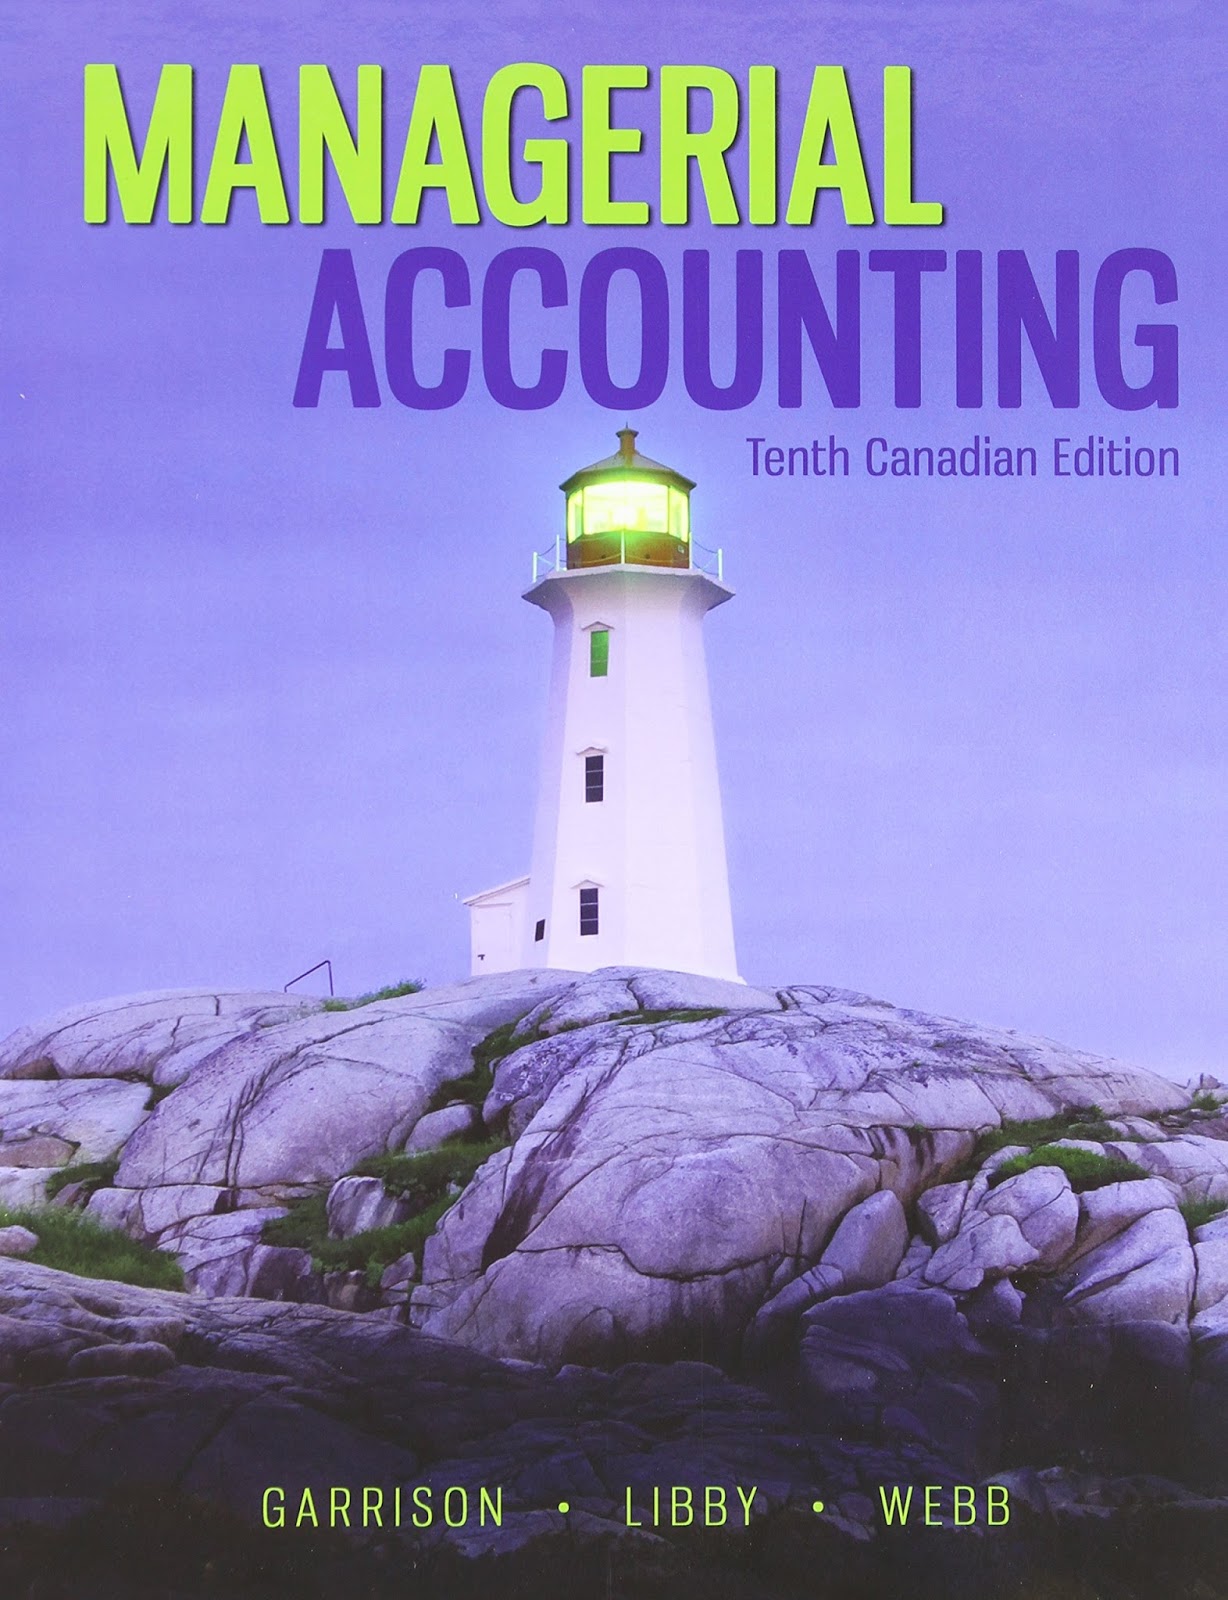 Managerial Accounting 10th Edition (Garrison, Noreen, Libby, Webb) Book with Solution My All